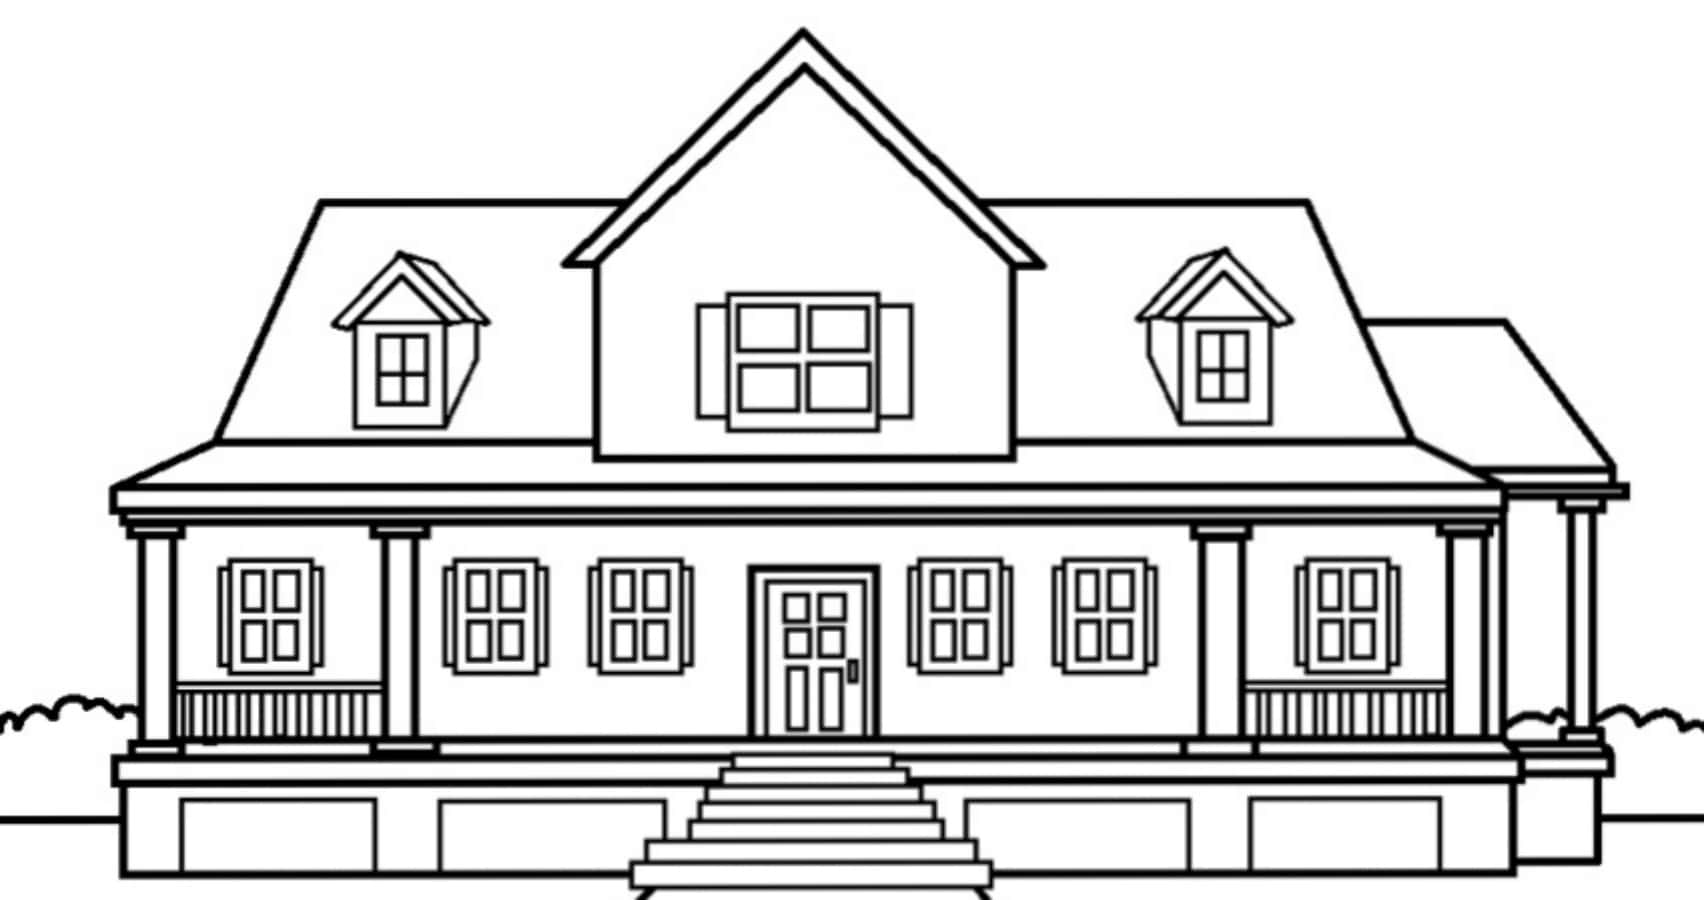 How to Draw A House Step by Step